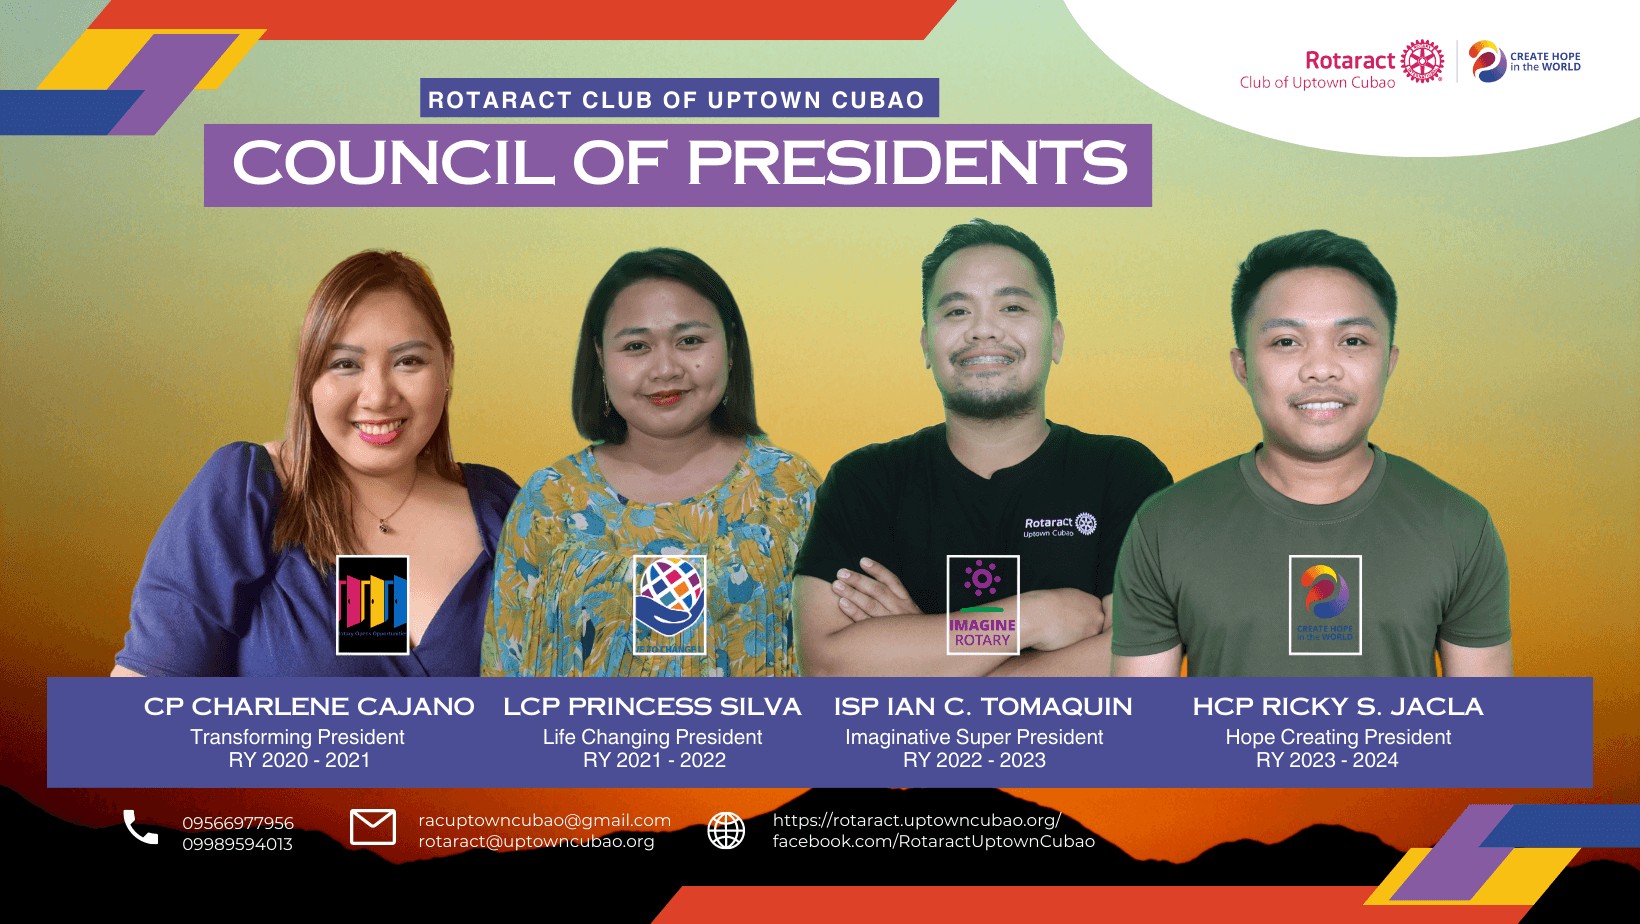 Celebrating a Legacy of Leadership: Introducing the Rotaract Club of Uptown Cubao’s Council of Presidents